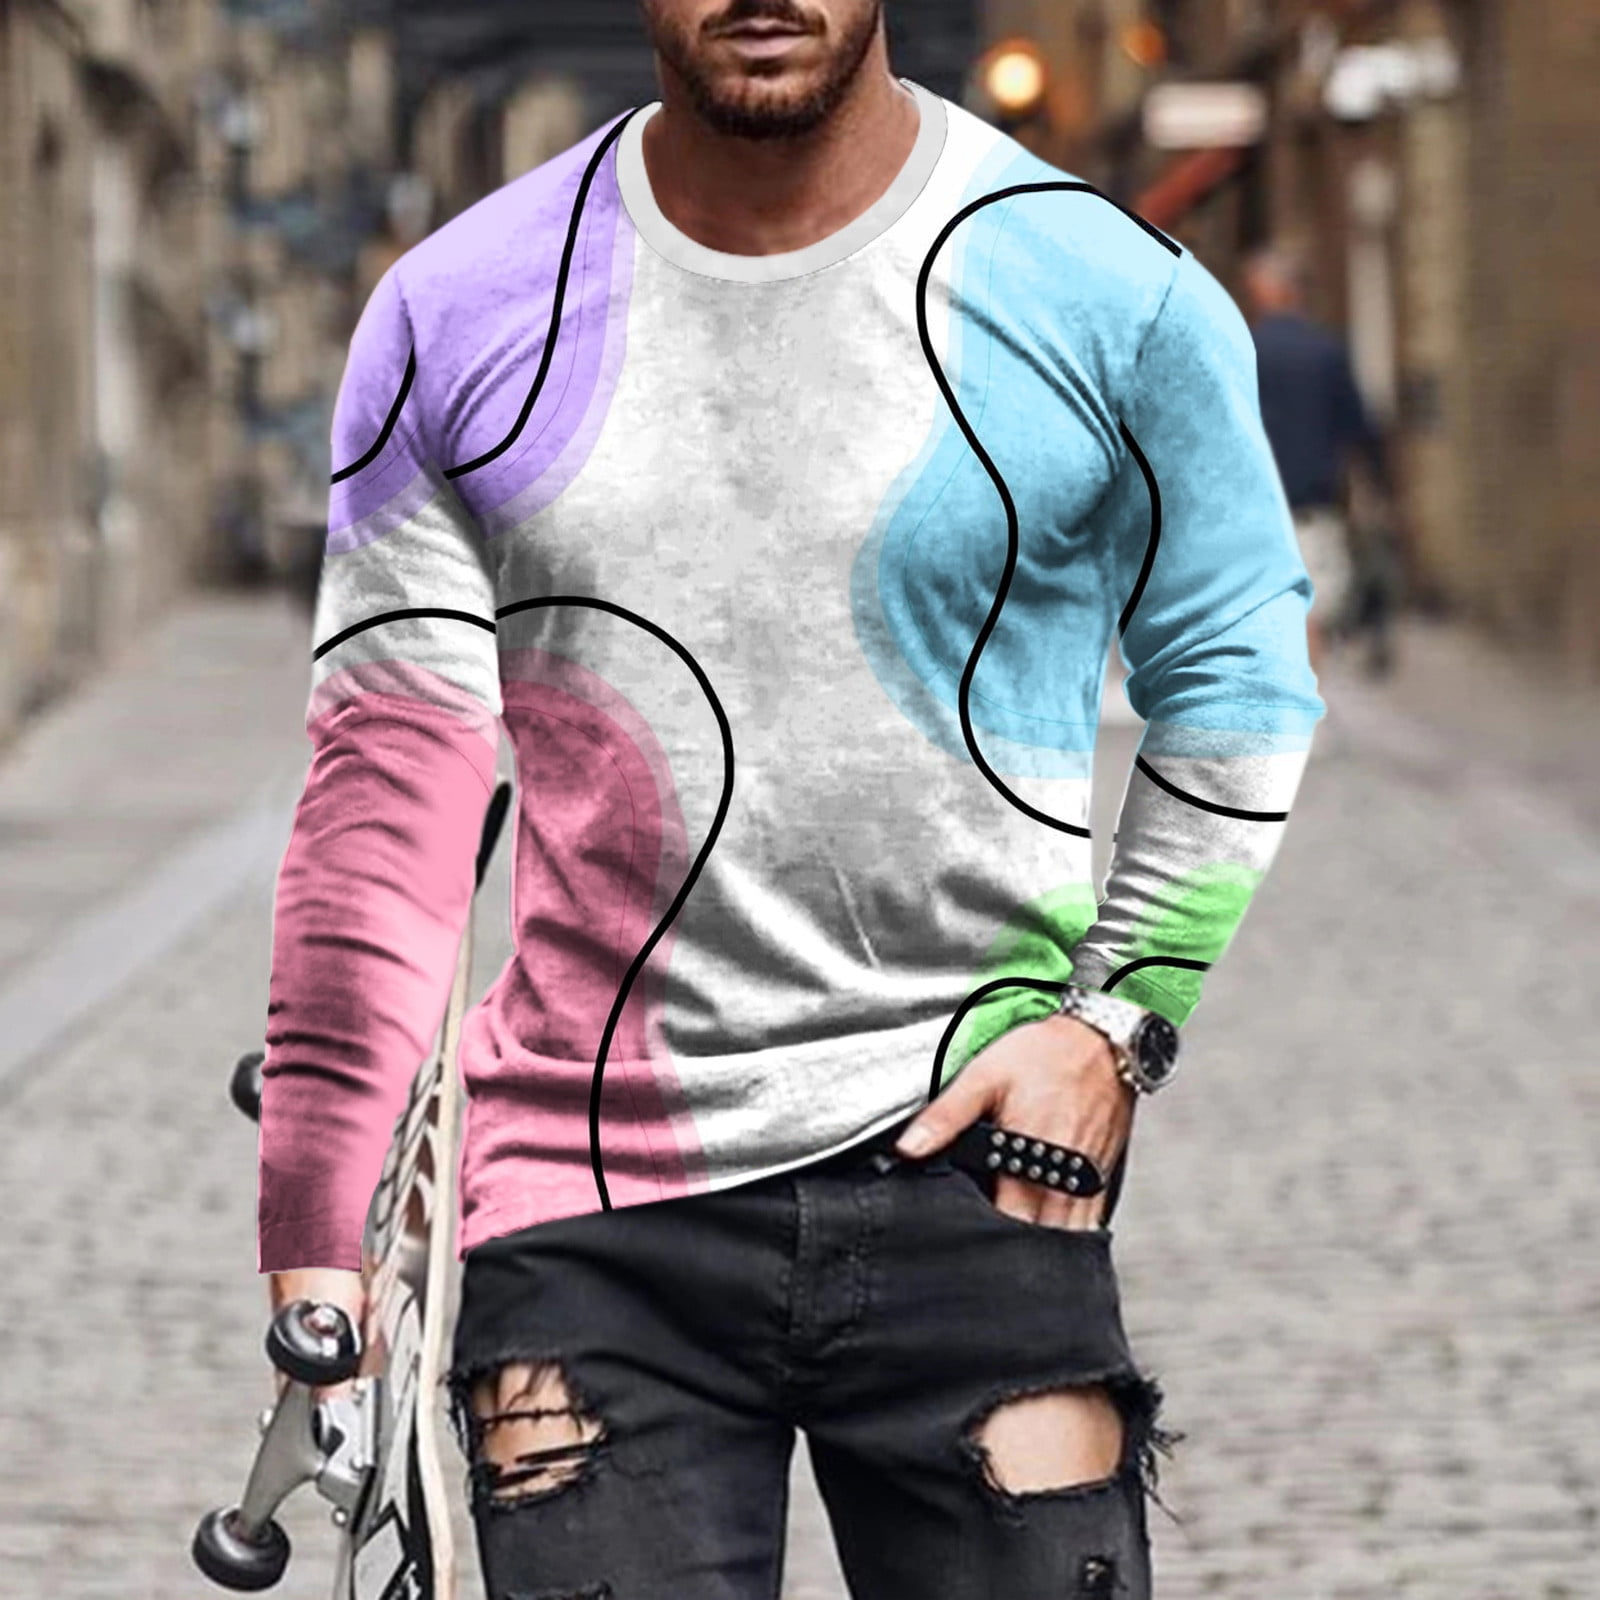 jsaierl Mens Long Sleeve Shirts 3D Graphic Tee Street Fashion Crew Neck  Tops Slim Fit Muscle T Shirts 